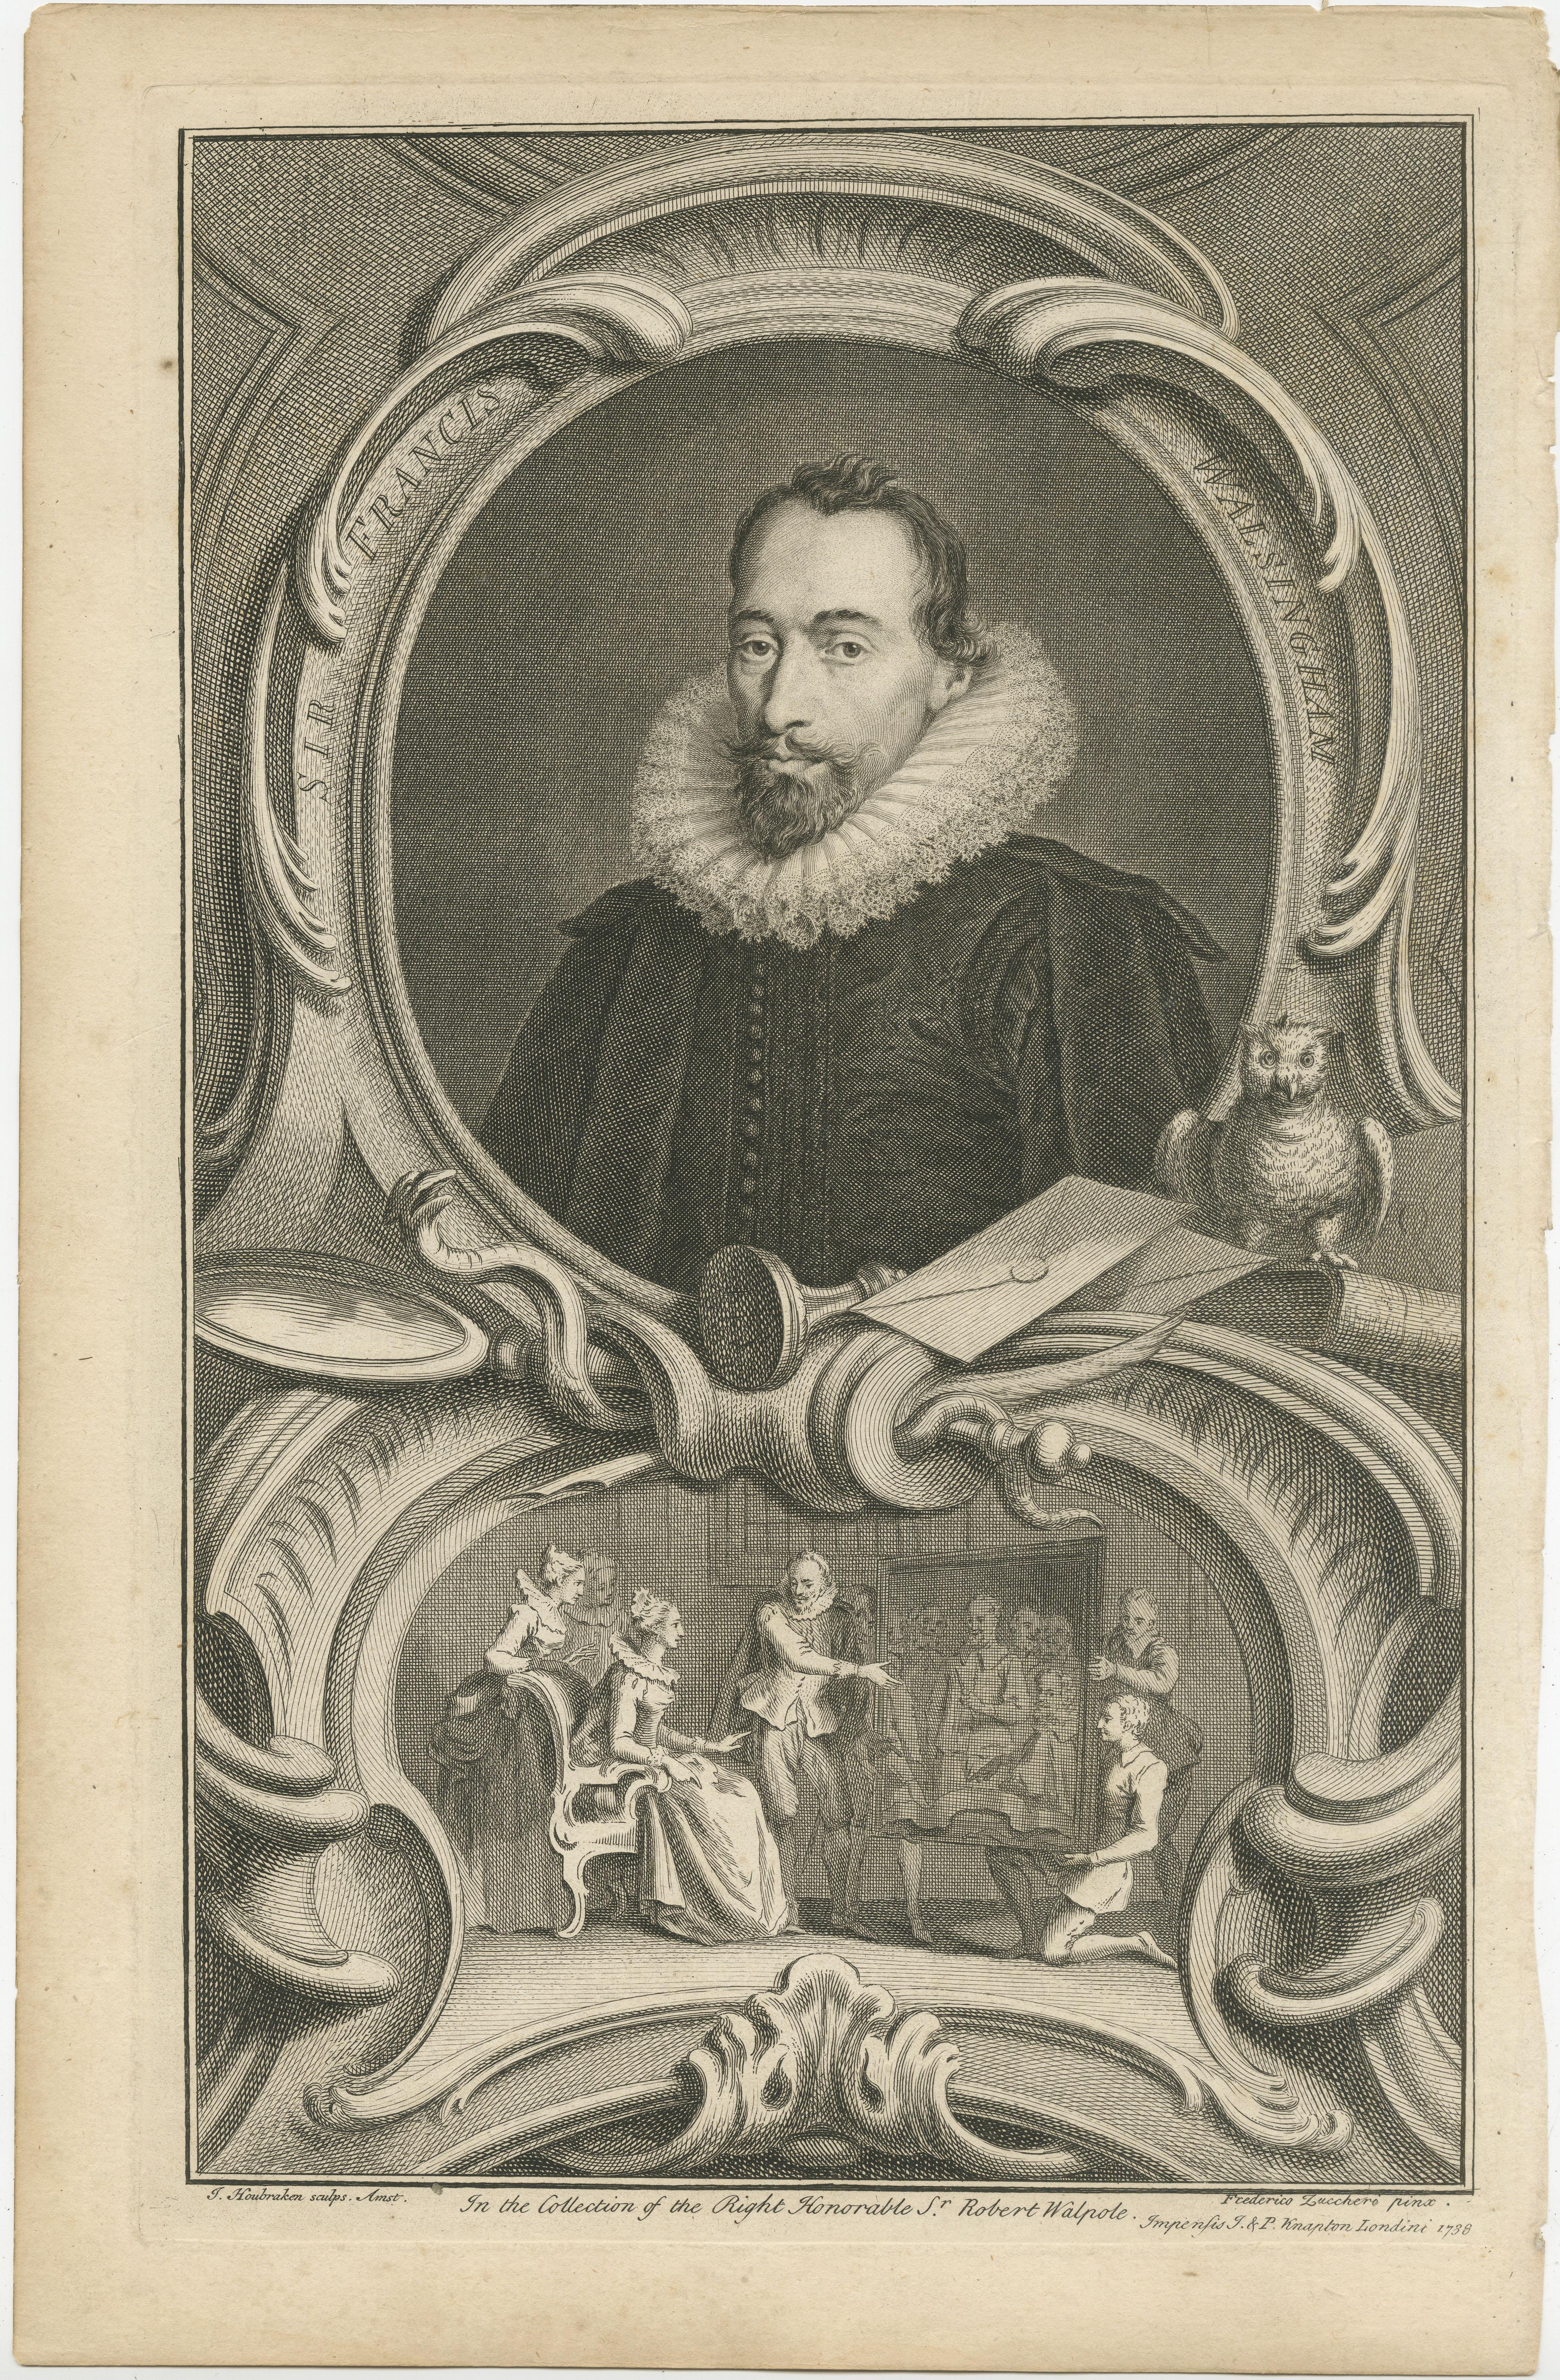 Antique portrait titled 'Sir Francis Walsingham'. Old print of Sir Francis Walsingham (c.?1532 – 6 April 1590). He was principal secretary to Queen Elizabeth I of England from 20 December 1573 until his death and is popularly remembered as her